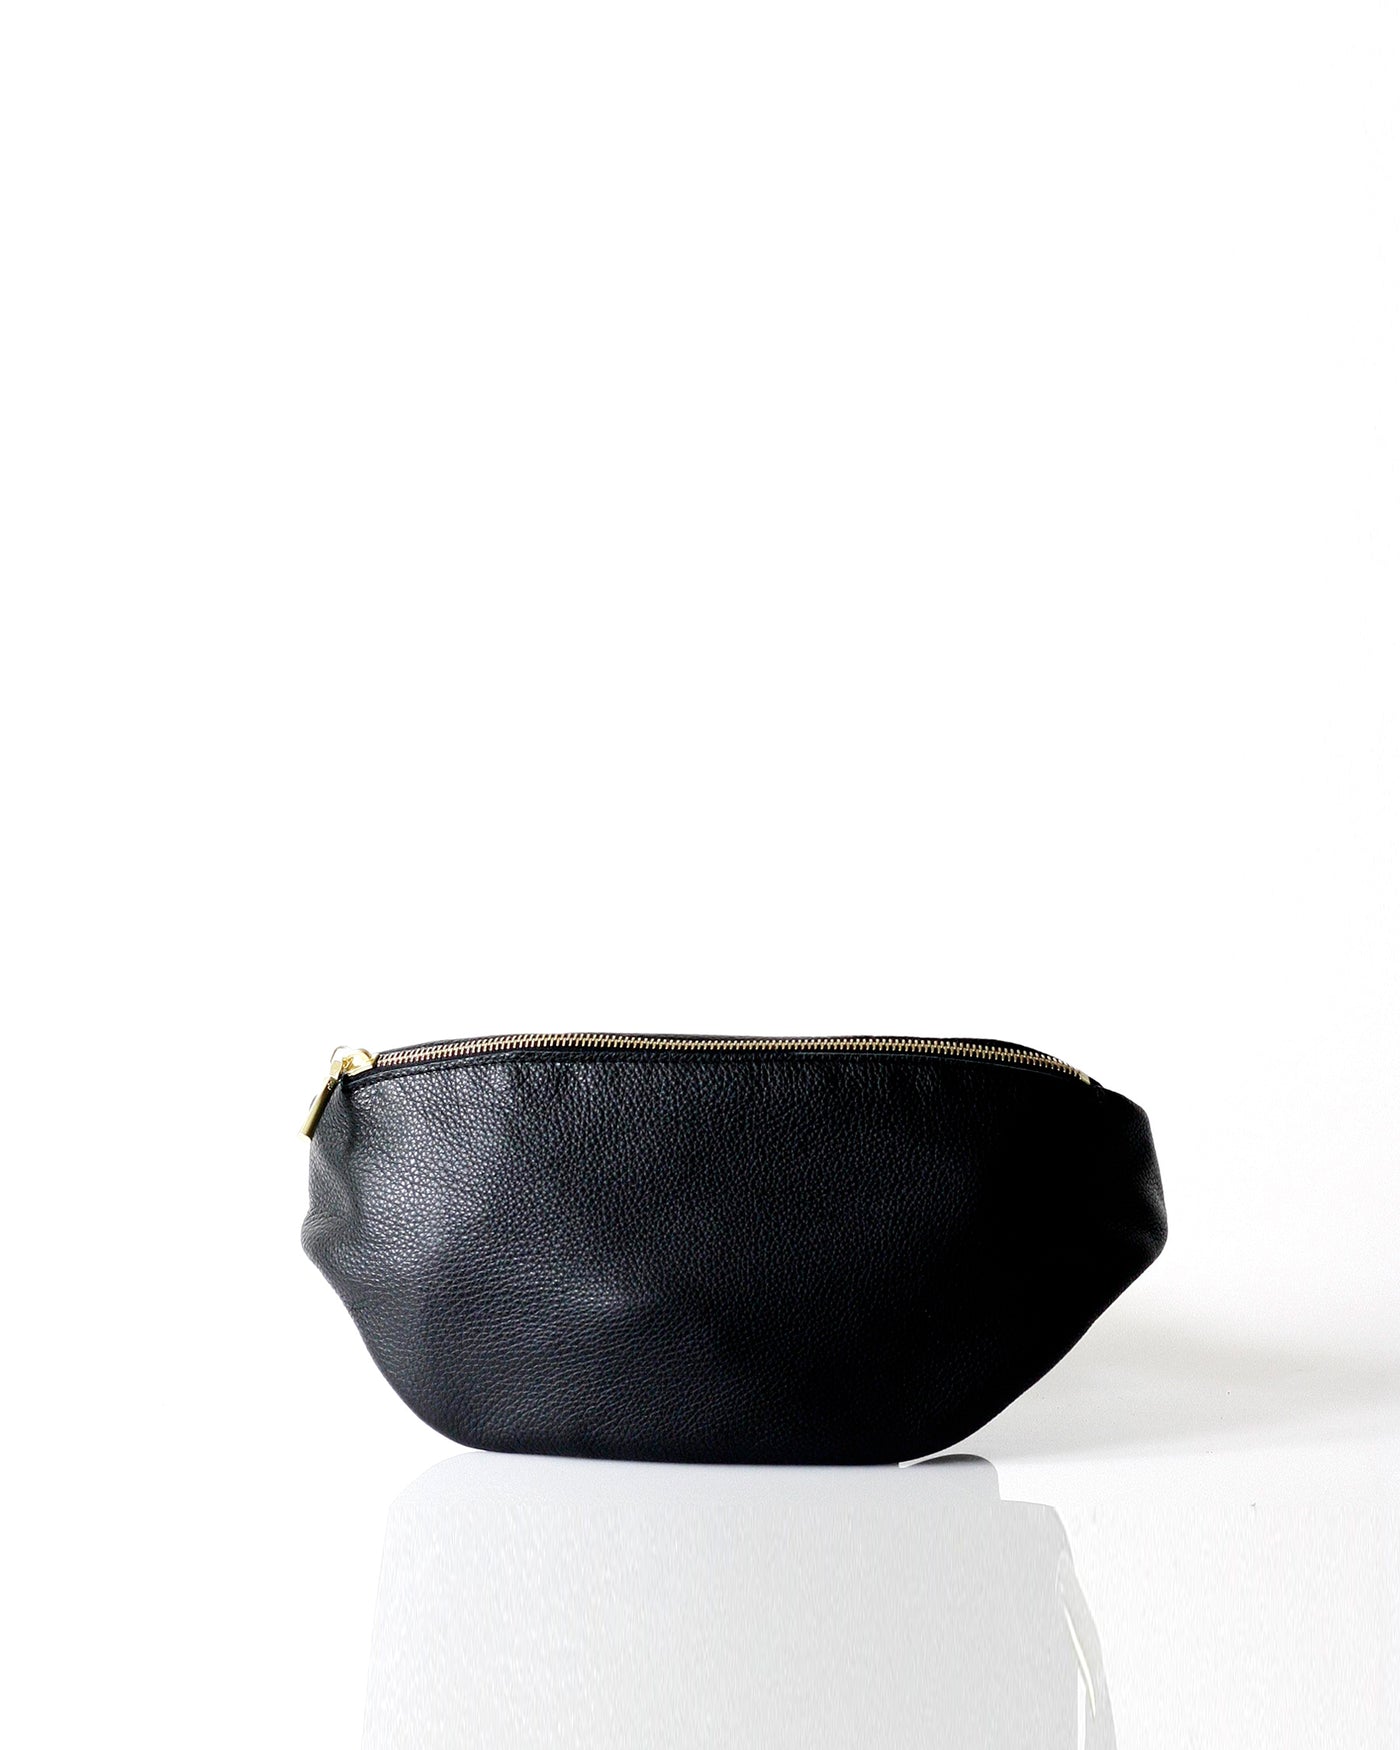 Lola Belt Bag - Opelle bag Permanent Collection - Opelle leather handbag handcrafted leather bag toronto Canada